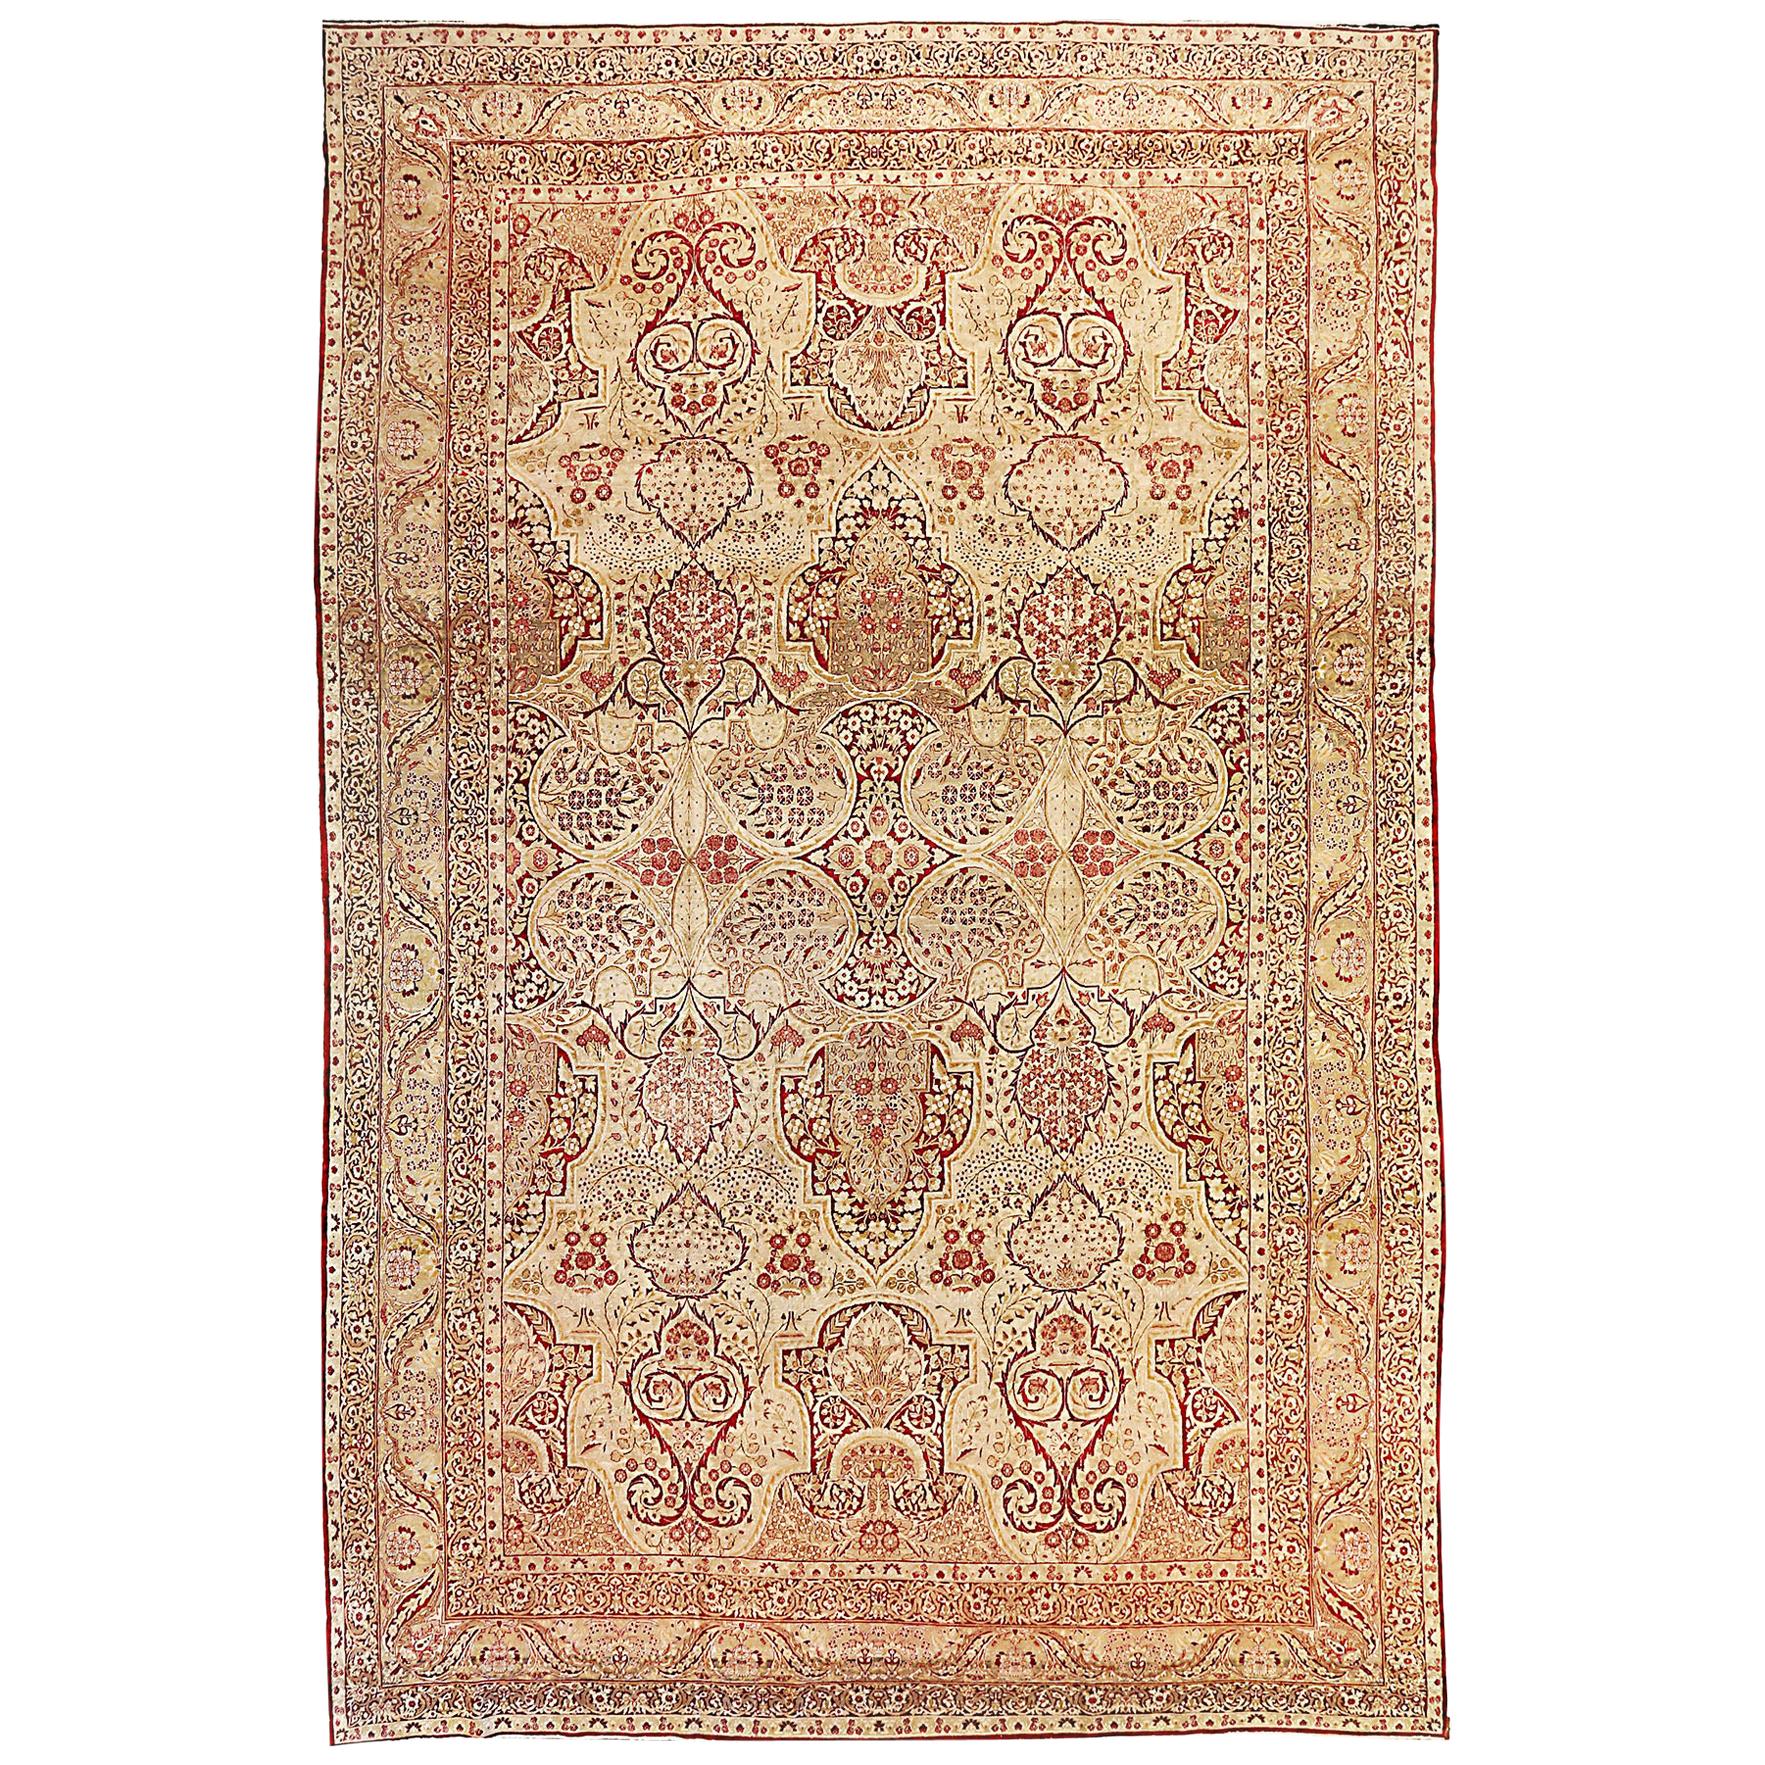 Rare 1920s Antique Persian Yazd Rug with Intricate Floral Details in Red For Sale